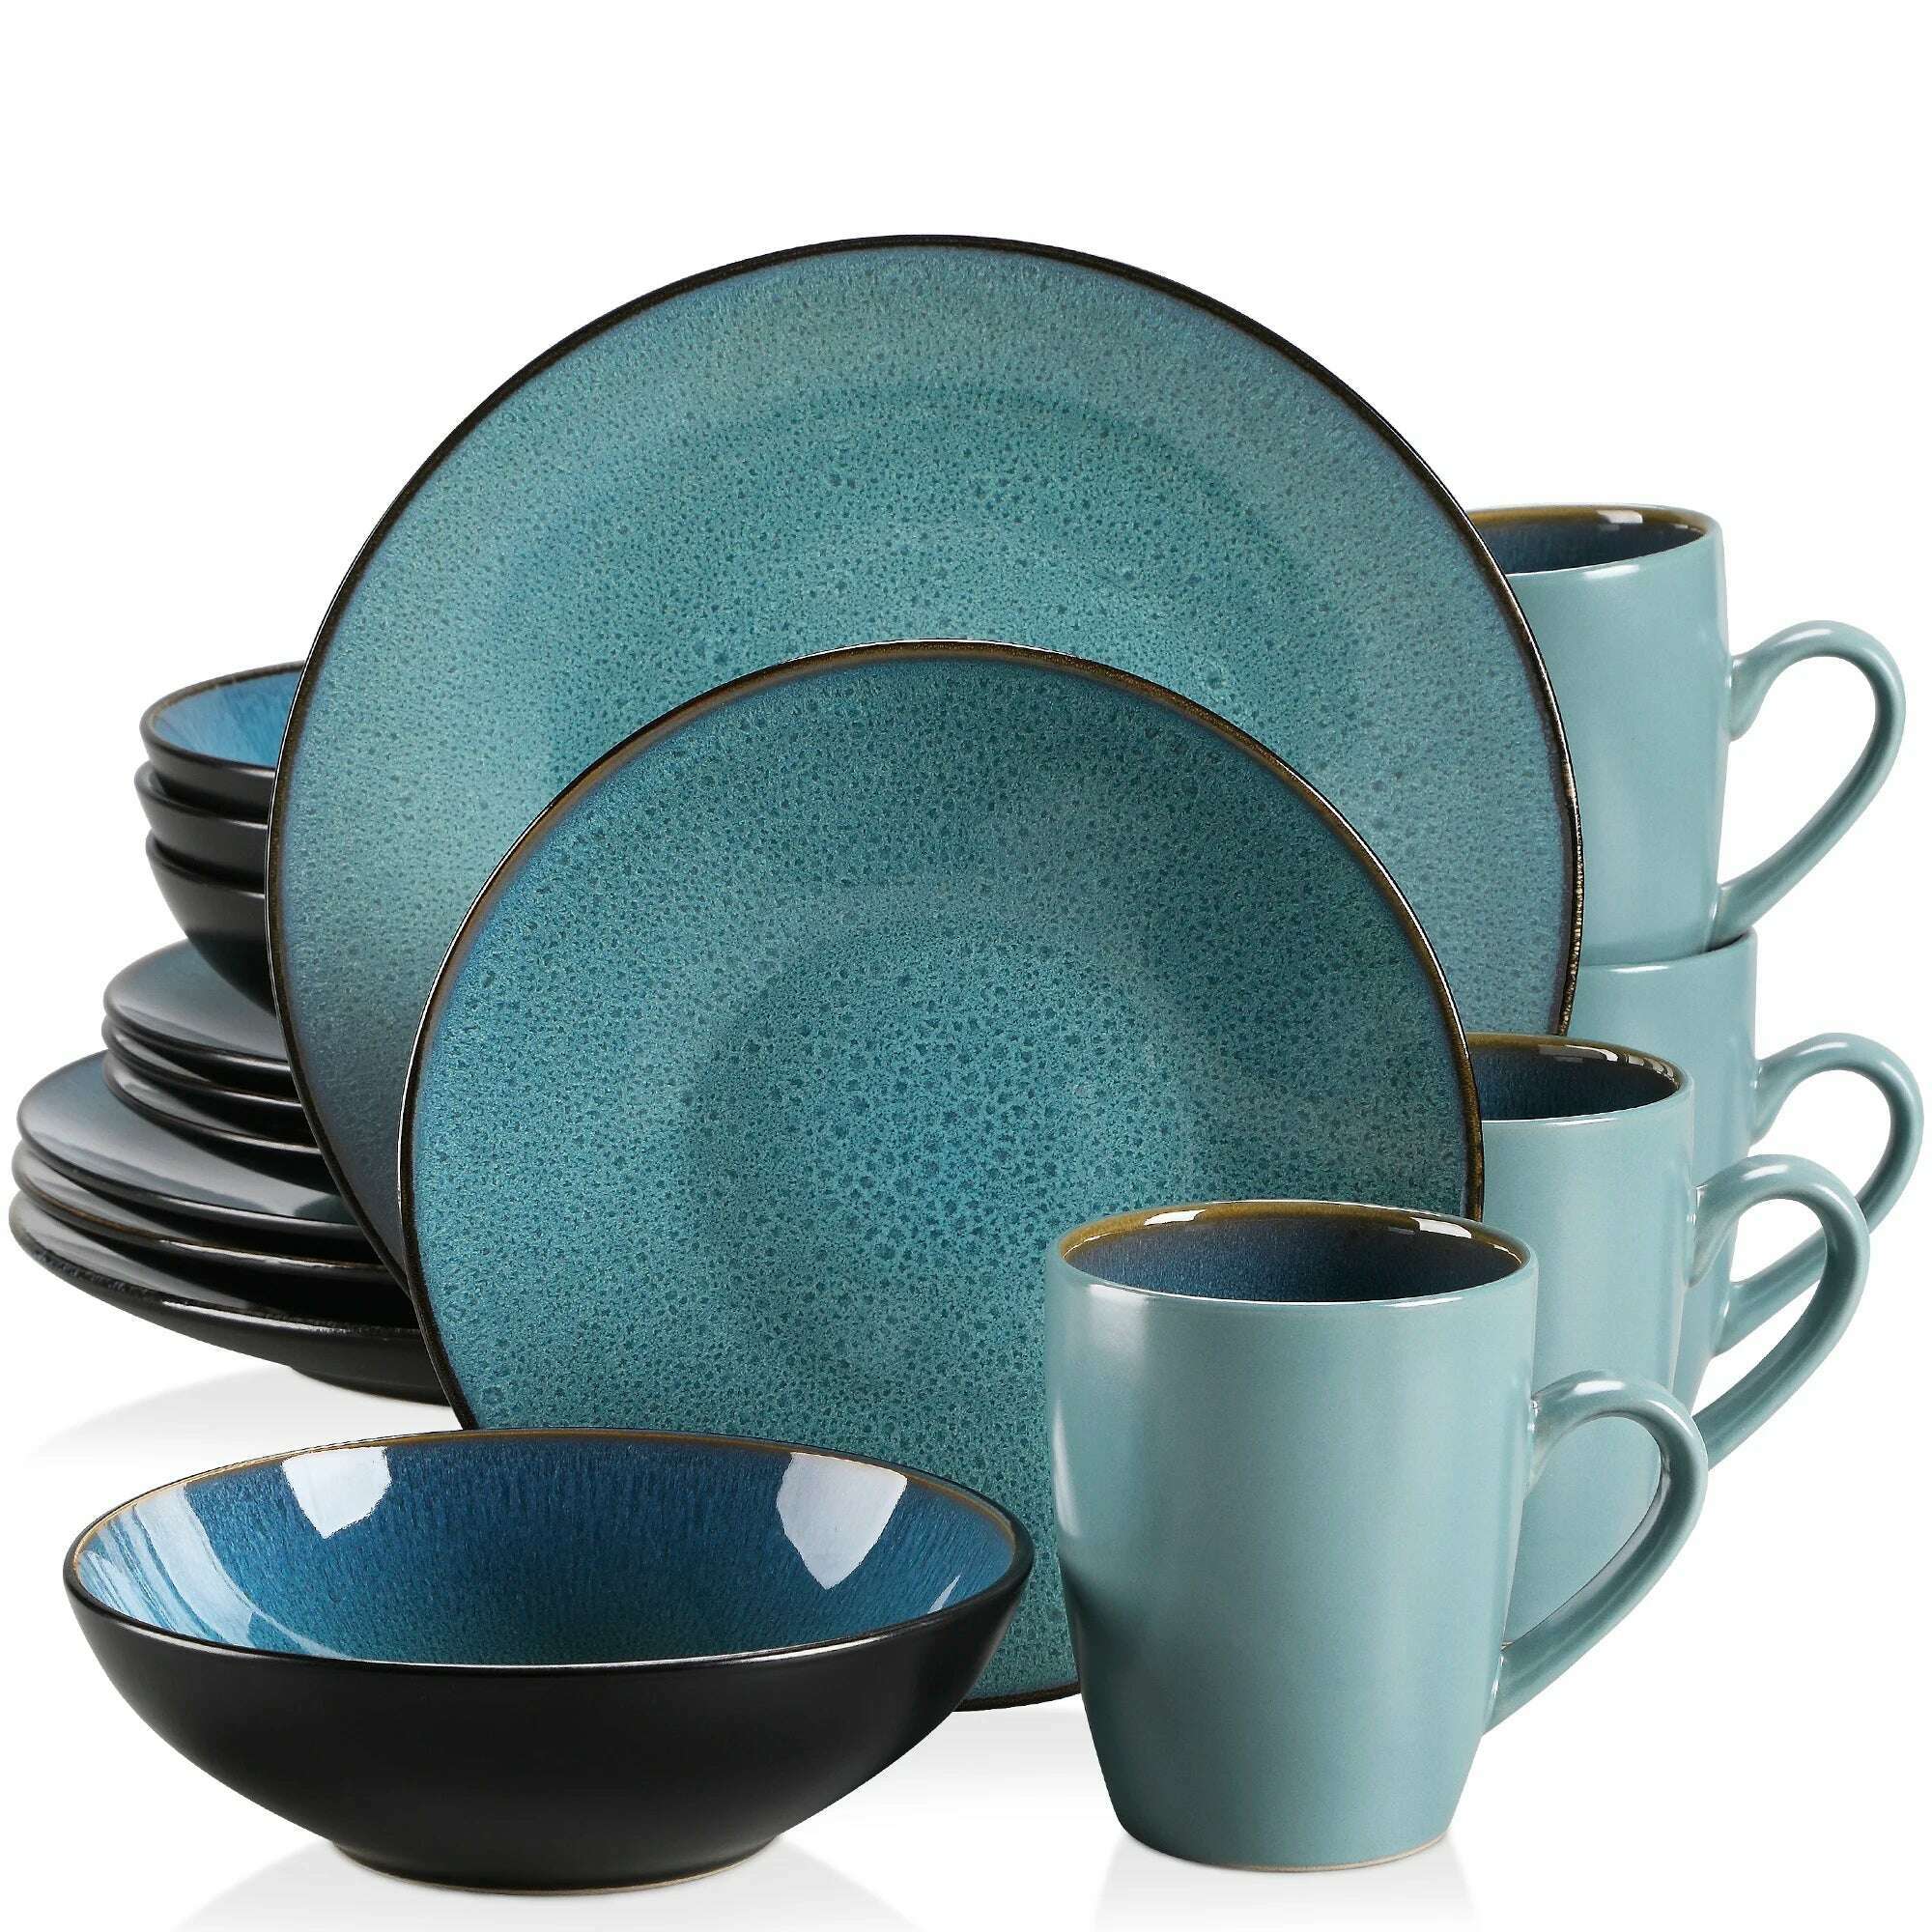 KIMLUD, VANCASSO BUBBLE 16/32/48-Piece Tableware Set Vintage Ceramic Blue/Brown Stoneware Set with Dinner&Dessert Plate,Bowl,Coffee Cups, Green-16-Piece / United States, KIMLUD Womens Clothes